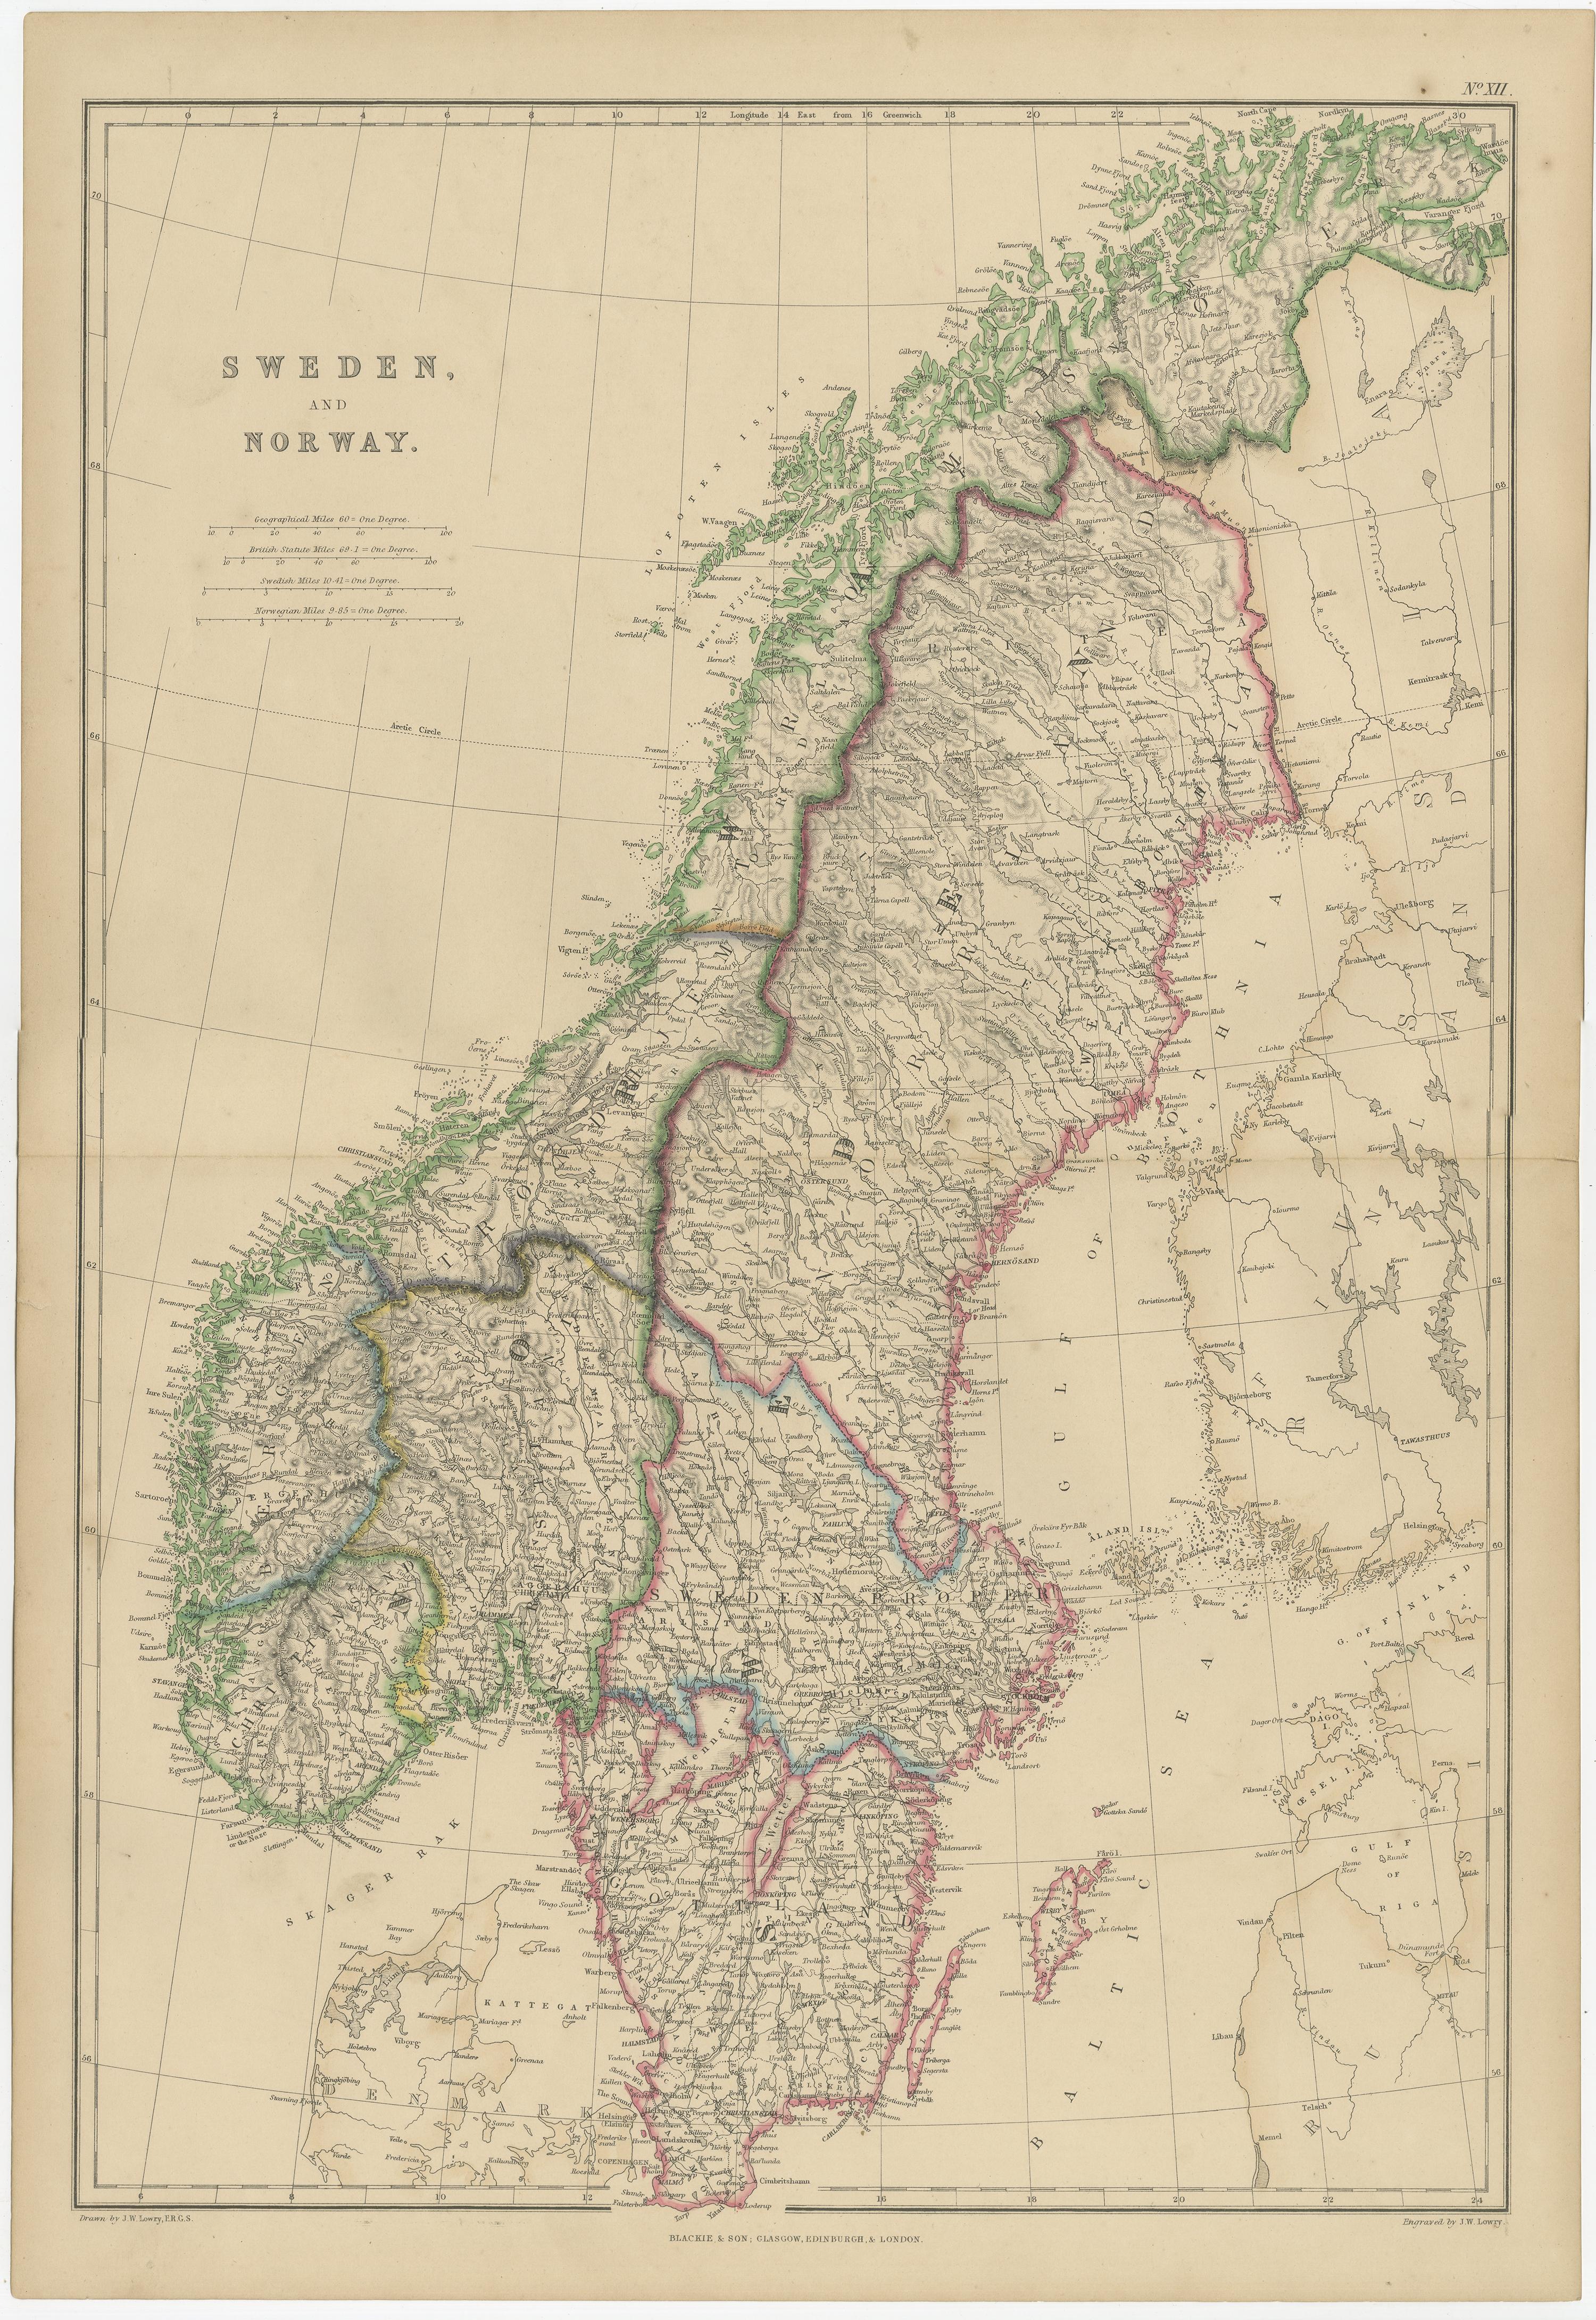 Antique map titled 'Sweden and Norway'. Original antique map of Sweden and Norway. This map originates from ‘The Imperial Atlas of Modern Geography’. Published by W. G. Blackie, 1859.